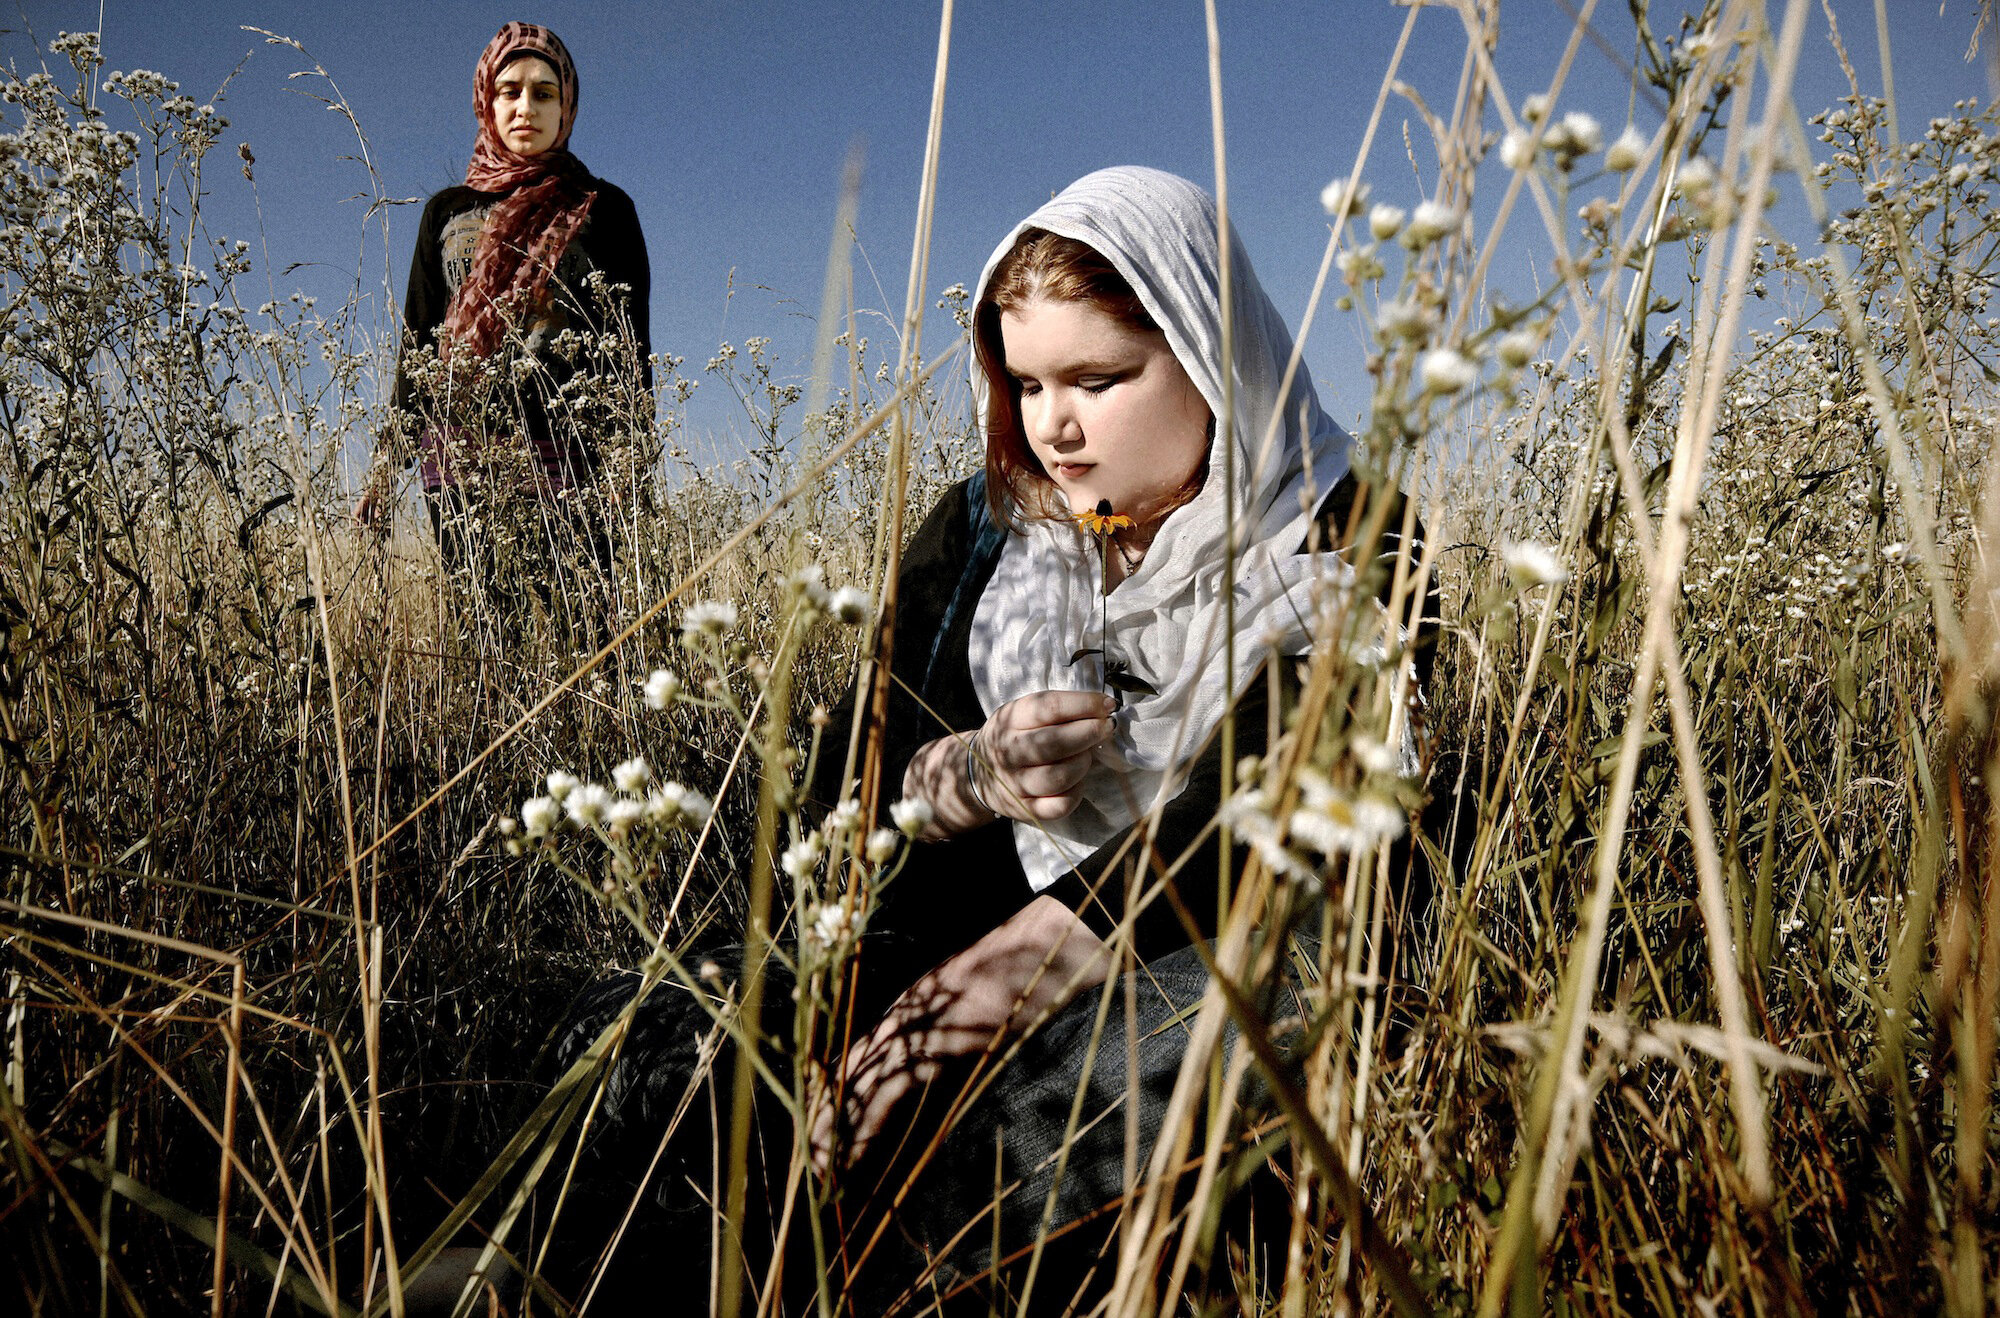   USA. Columbia, Missouri. 2010. Caitlyn Green [right], and her friend photographed in a field. Caitlyn lives in a small town and converted to Islam more than two years ago. But her catholic mother and relatives do not accept her conversion. Caitlyn 